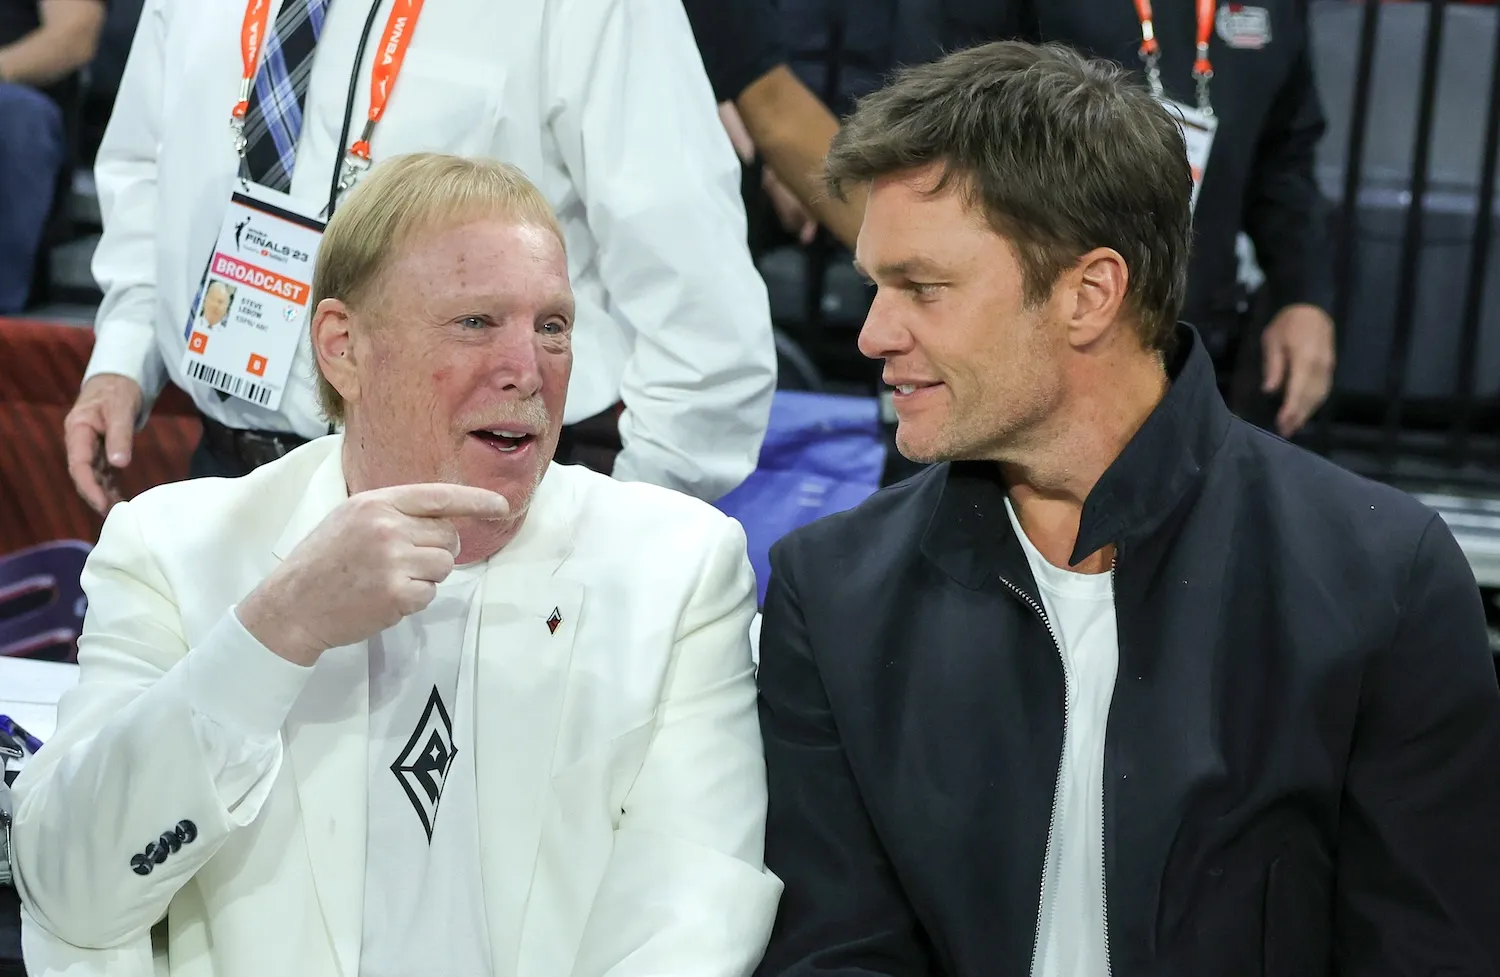 LAS VEGAS, NEVADA - OCTOBER 08: Las Vegas Raiders owner and managing general partner and Las Vegas Aces owner Mark Davis (L) and Tom Brady attend Game One of the 2023 WNBA Playoffs finals between the Aces and the New York Liberty at Michelob ULTRA Arena on October 08, 2023 in Las Vegas, Nevada. The Aces defeated the Liberty 99-82. NOTE TO USER: User expressly acknowledges and agrees that, by downloading and or using this photograph, User is consenting to the terms and conditions of the Getty Images License Agreement. (Photo by Ethan Miller/Getty Images)